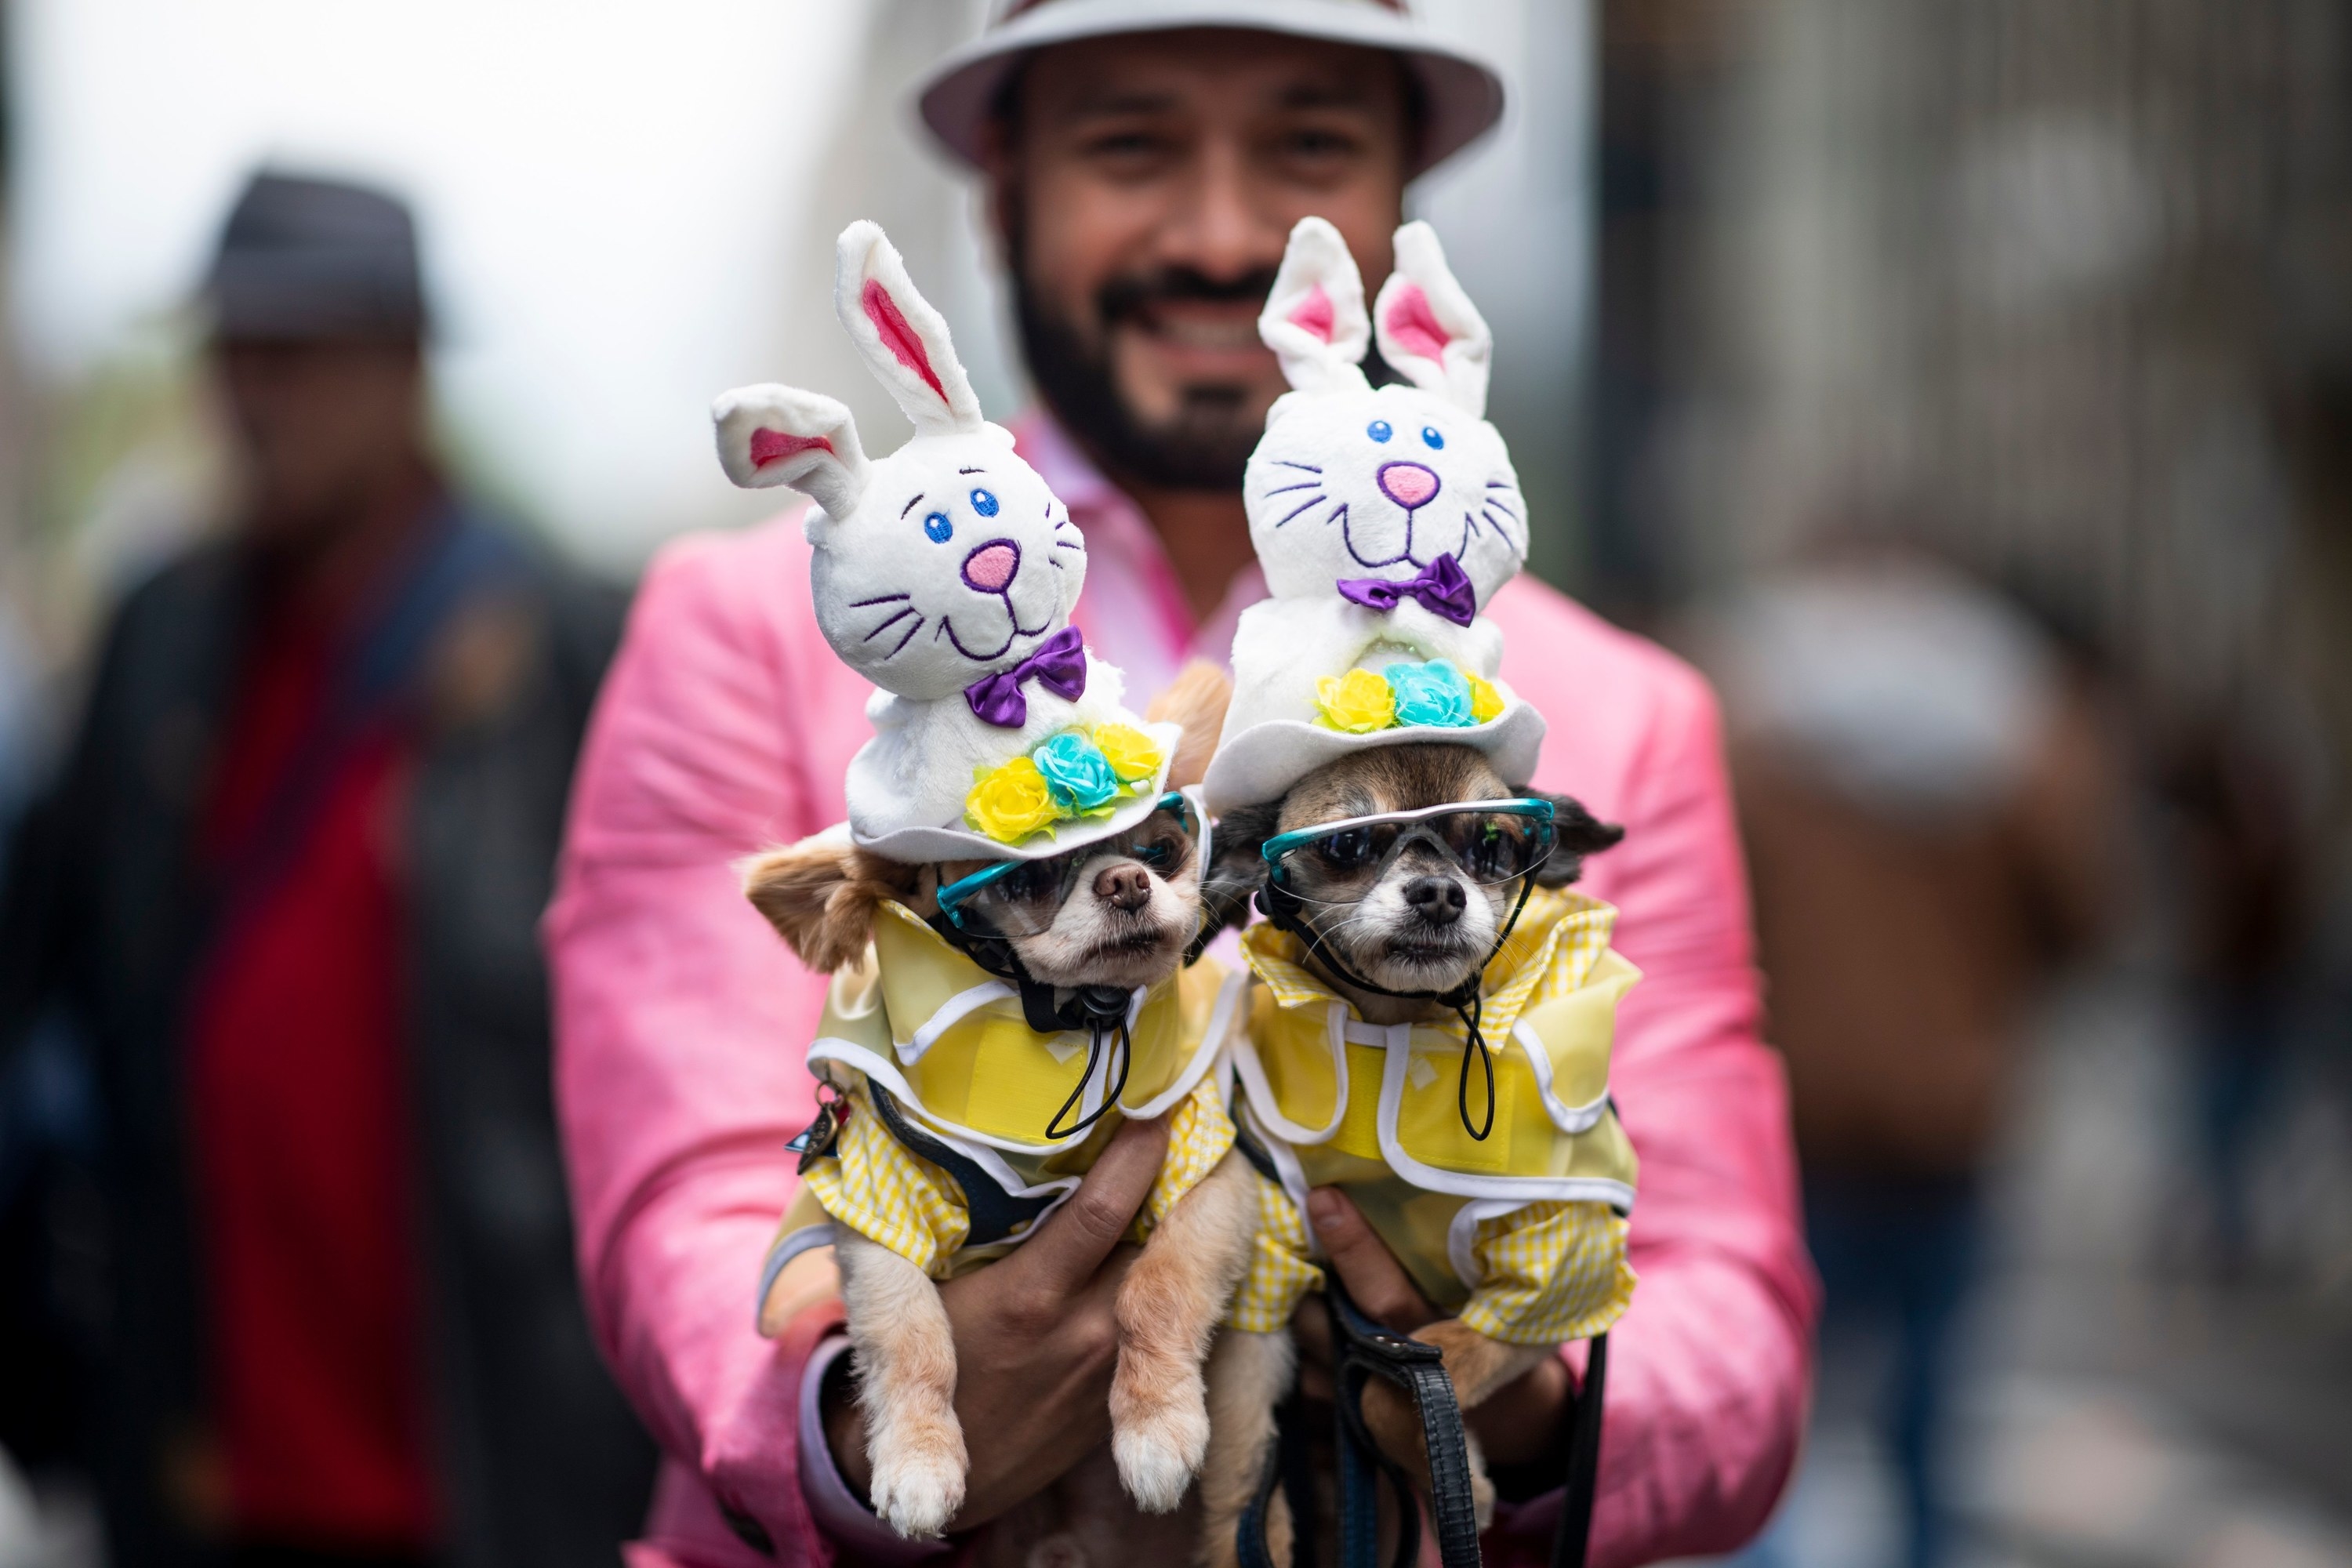 A smiling man holds up two toy dogs wearing jackets, hats, and sunglasses